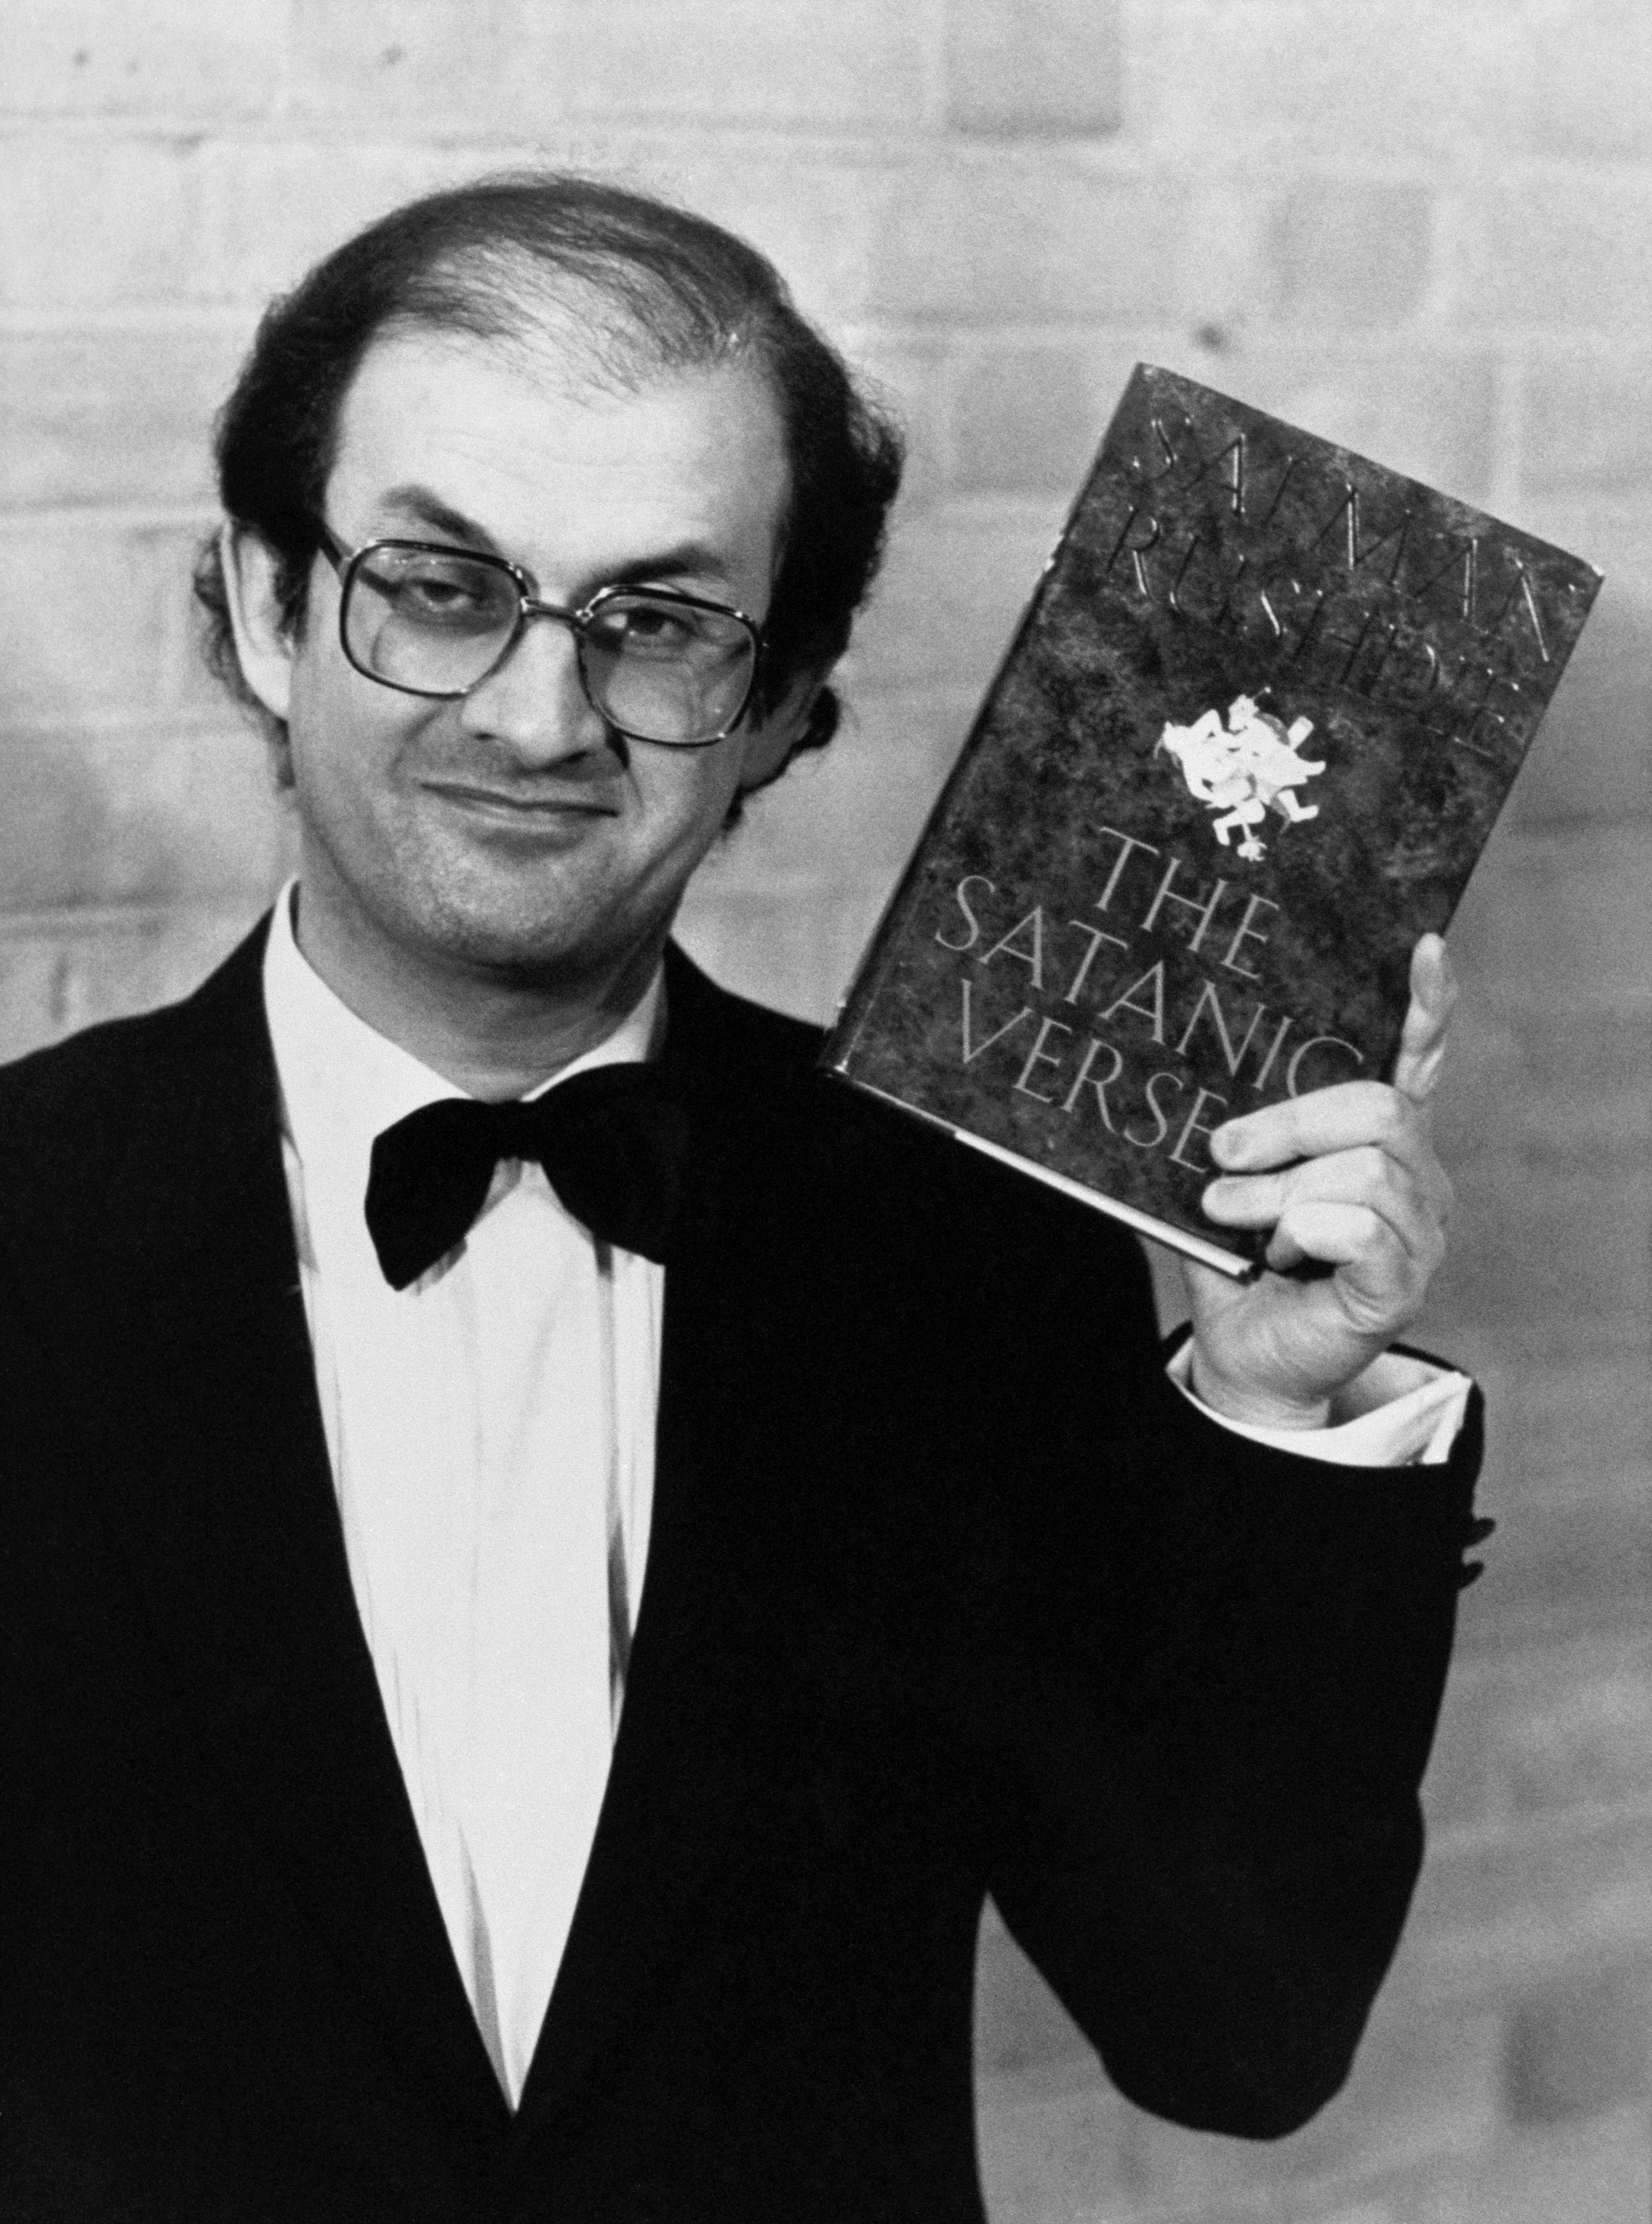 Controversy: Salman Rushdie published ‘The Satanic Verses’ in 1988